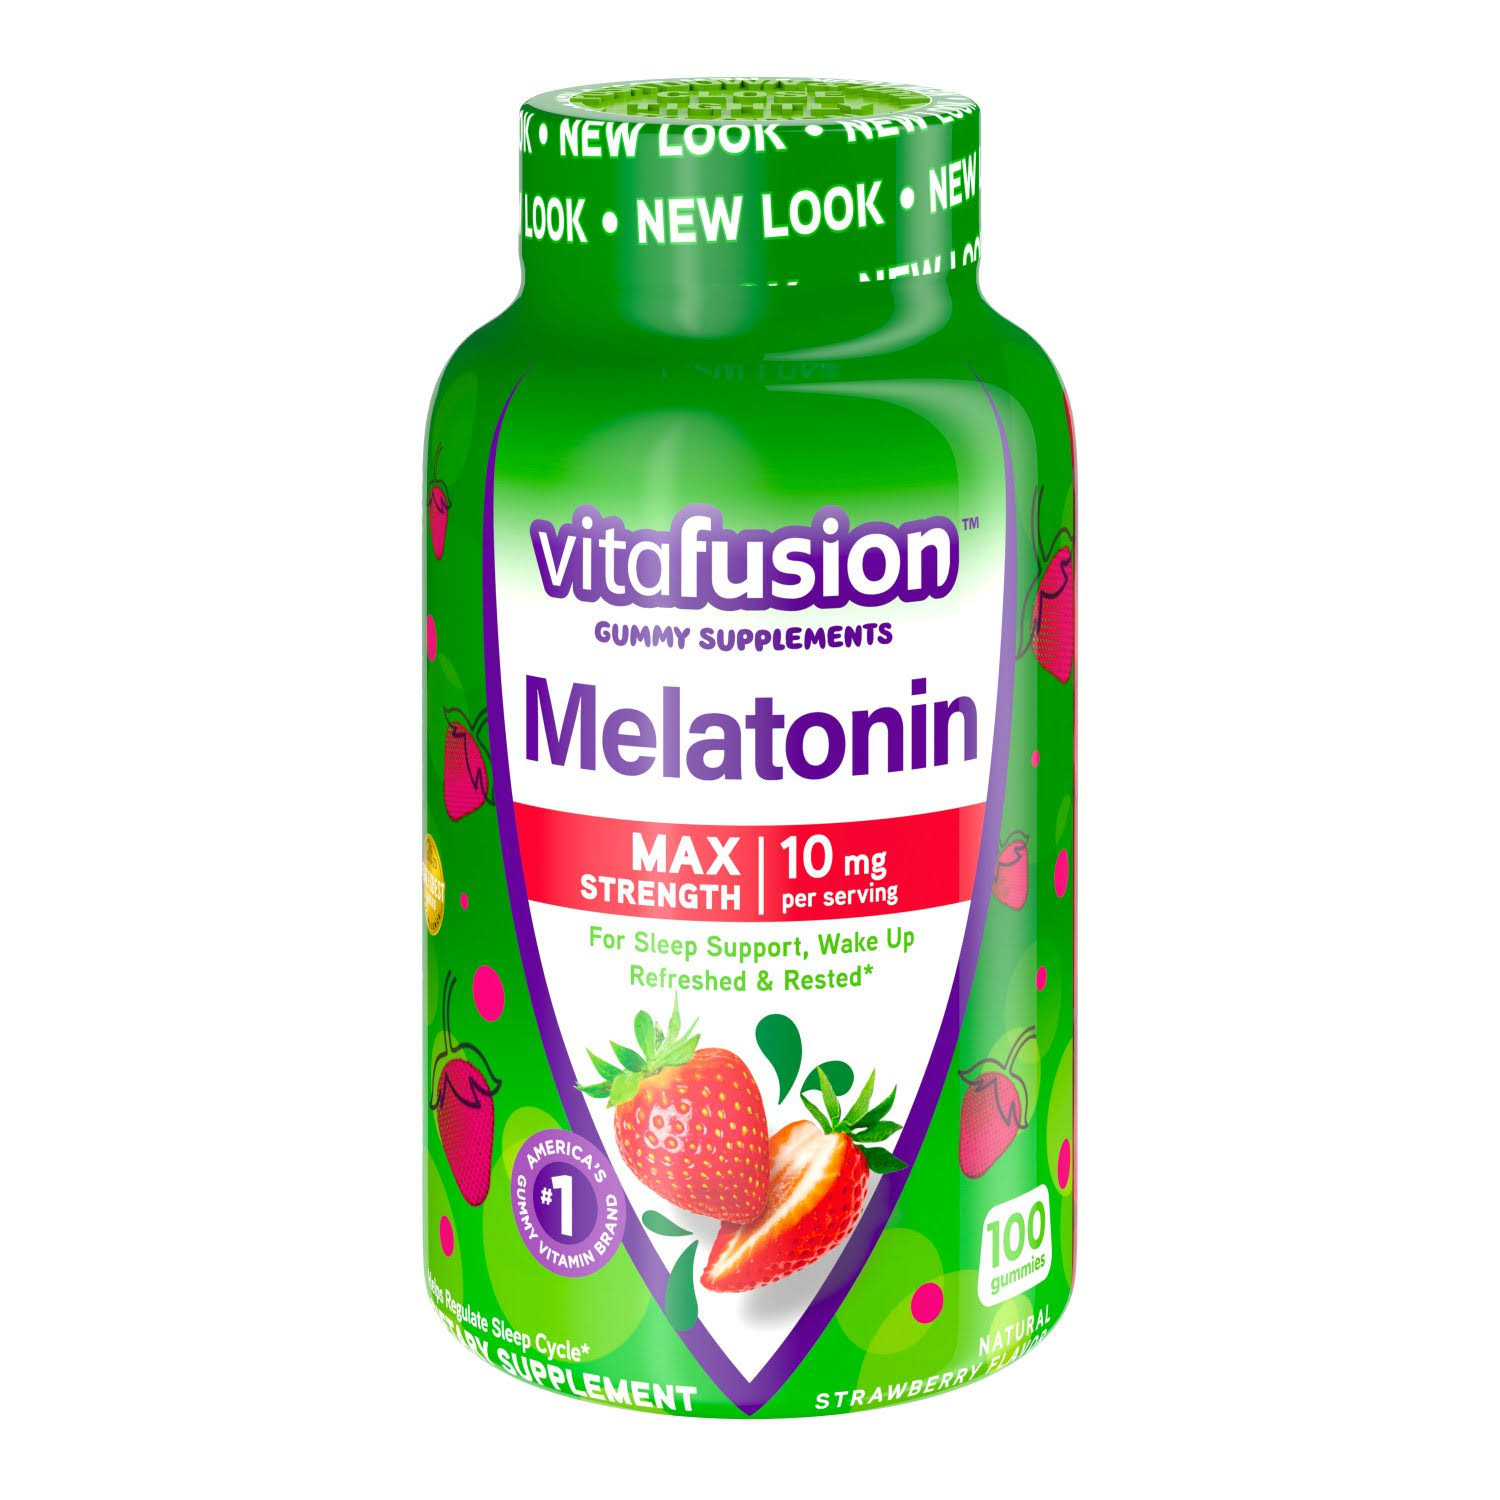 Vitafusion Gummy Supplements, Max Strength, 10 mg, Natural Strawberry Flavor - 100 gummies